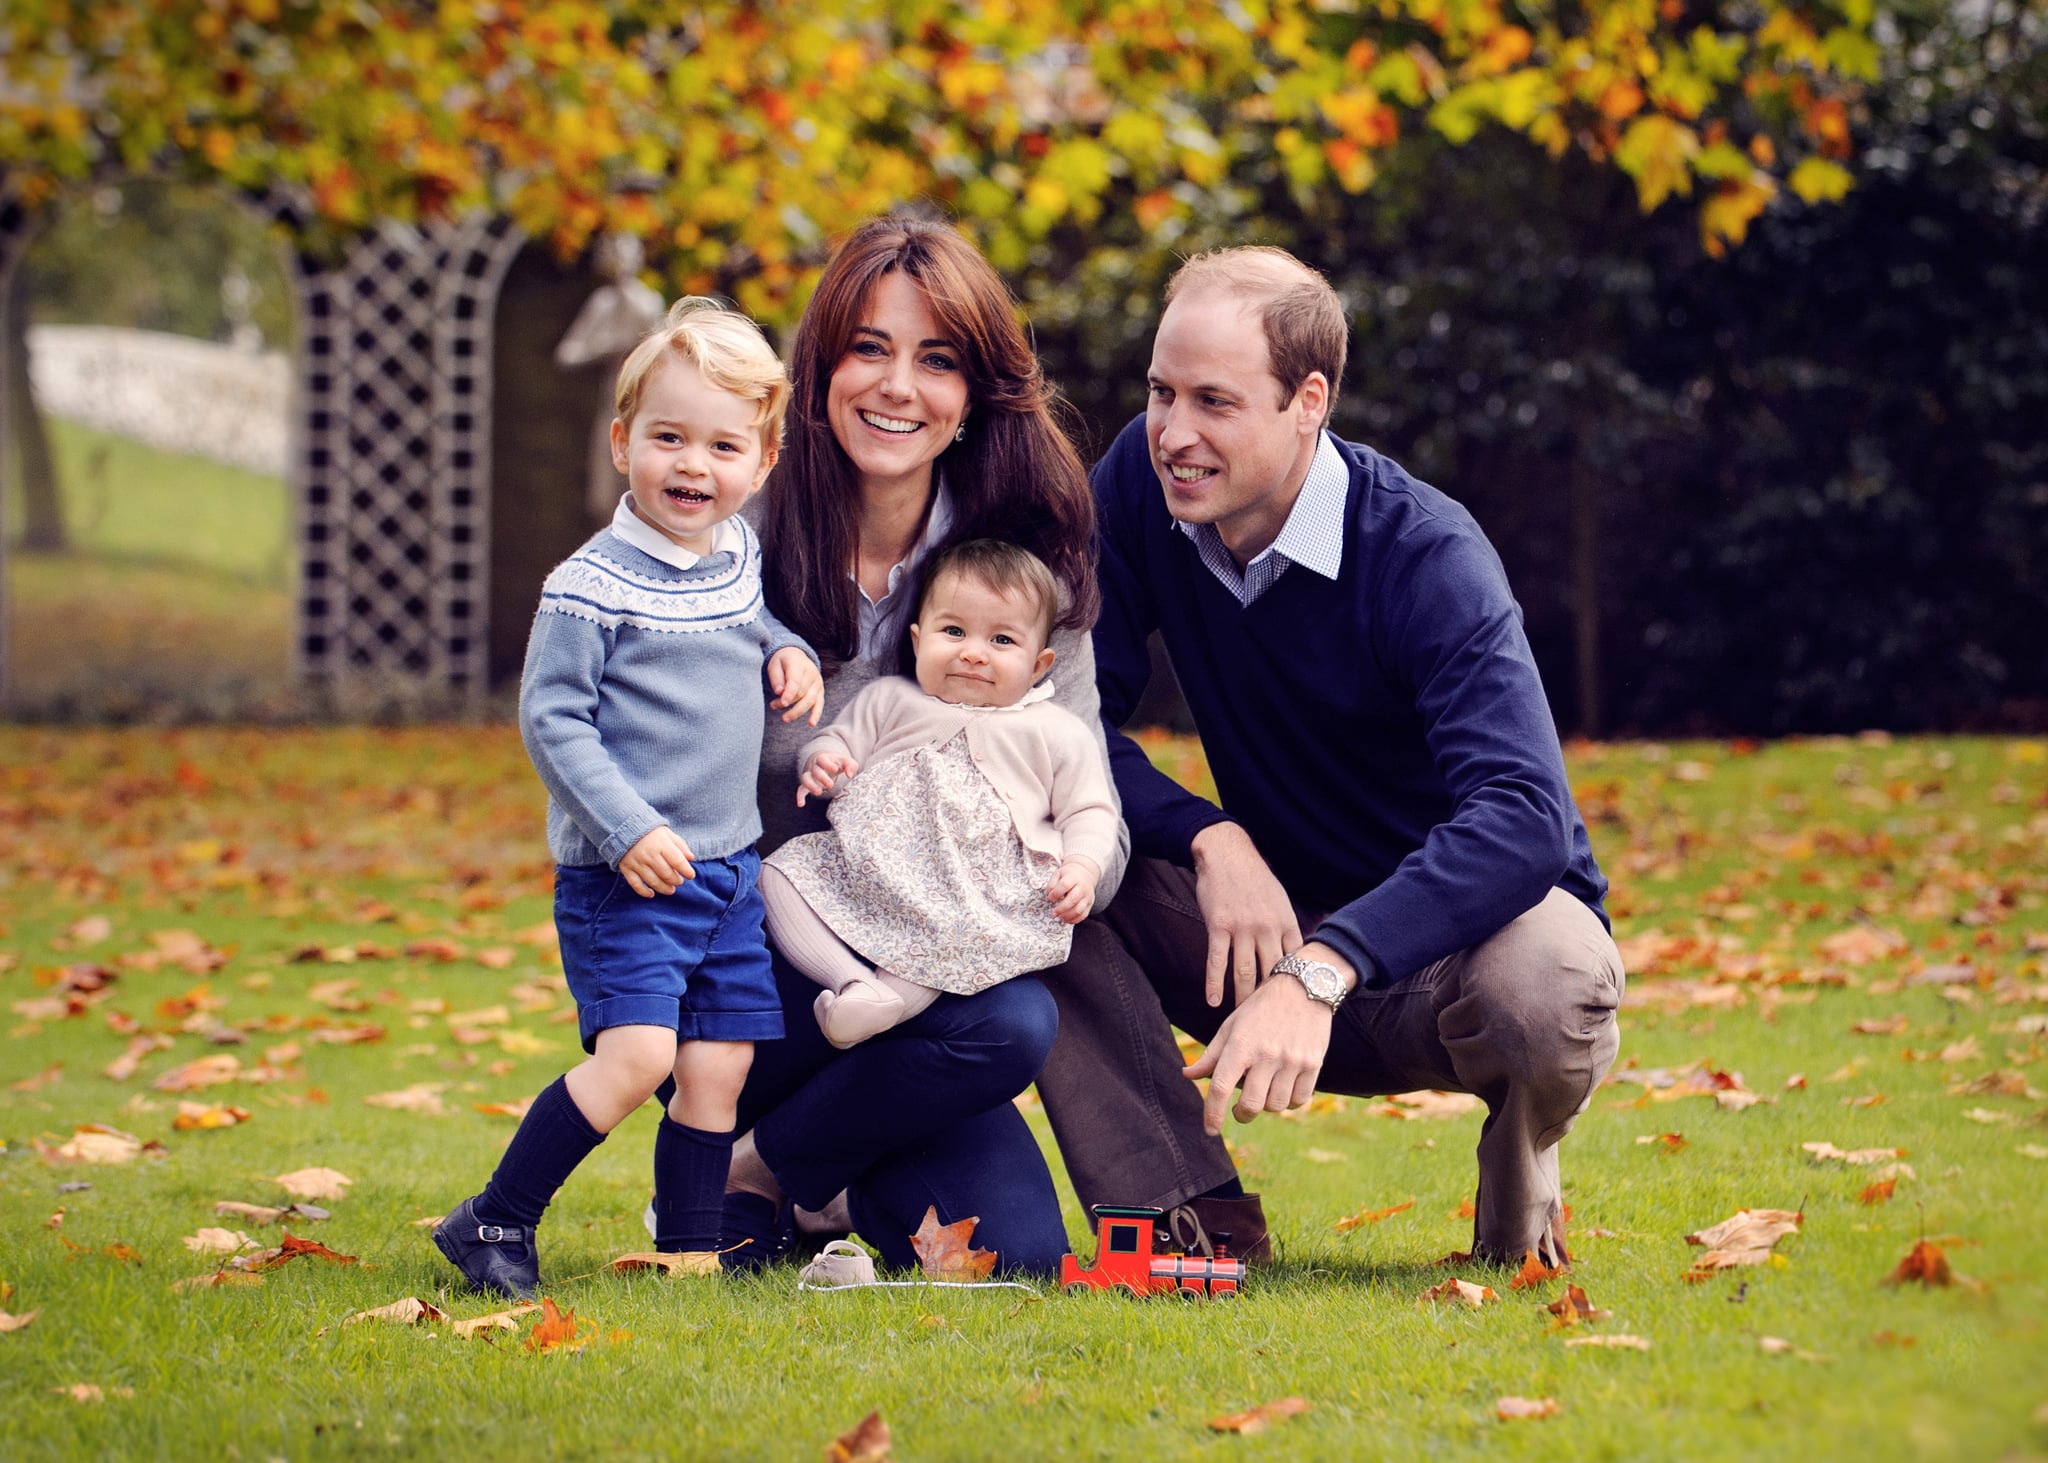 Kate Middleton And Prince William In The Park With Kids Popsugar Celebrity